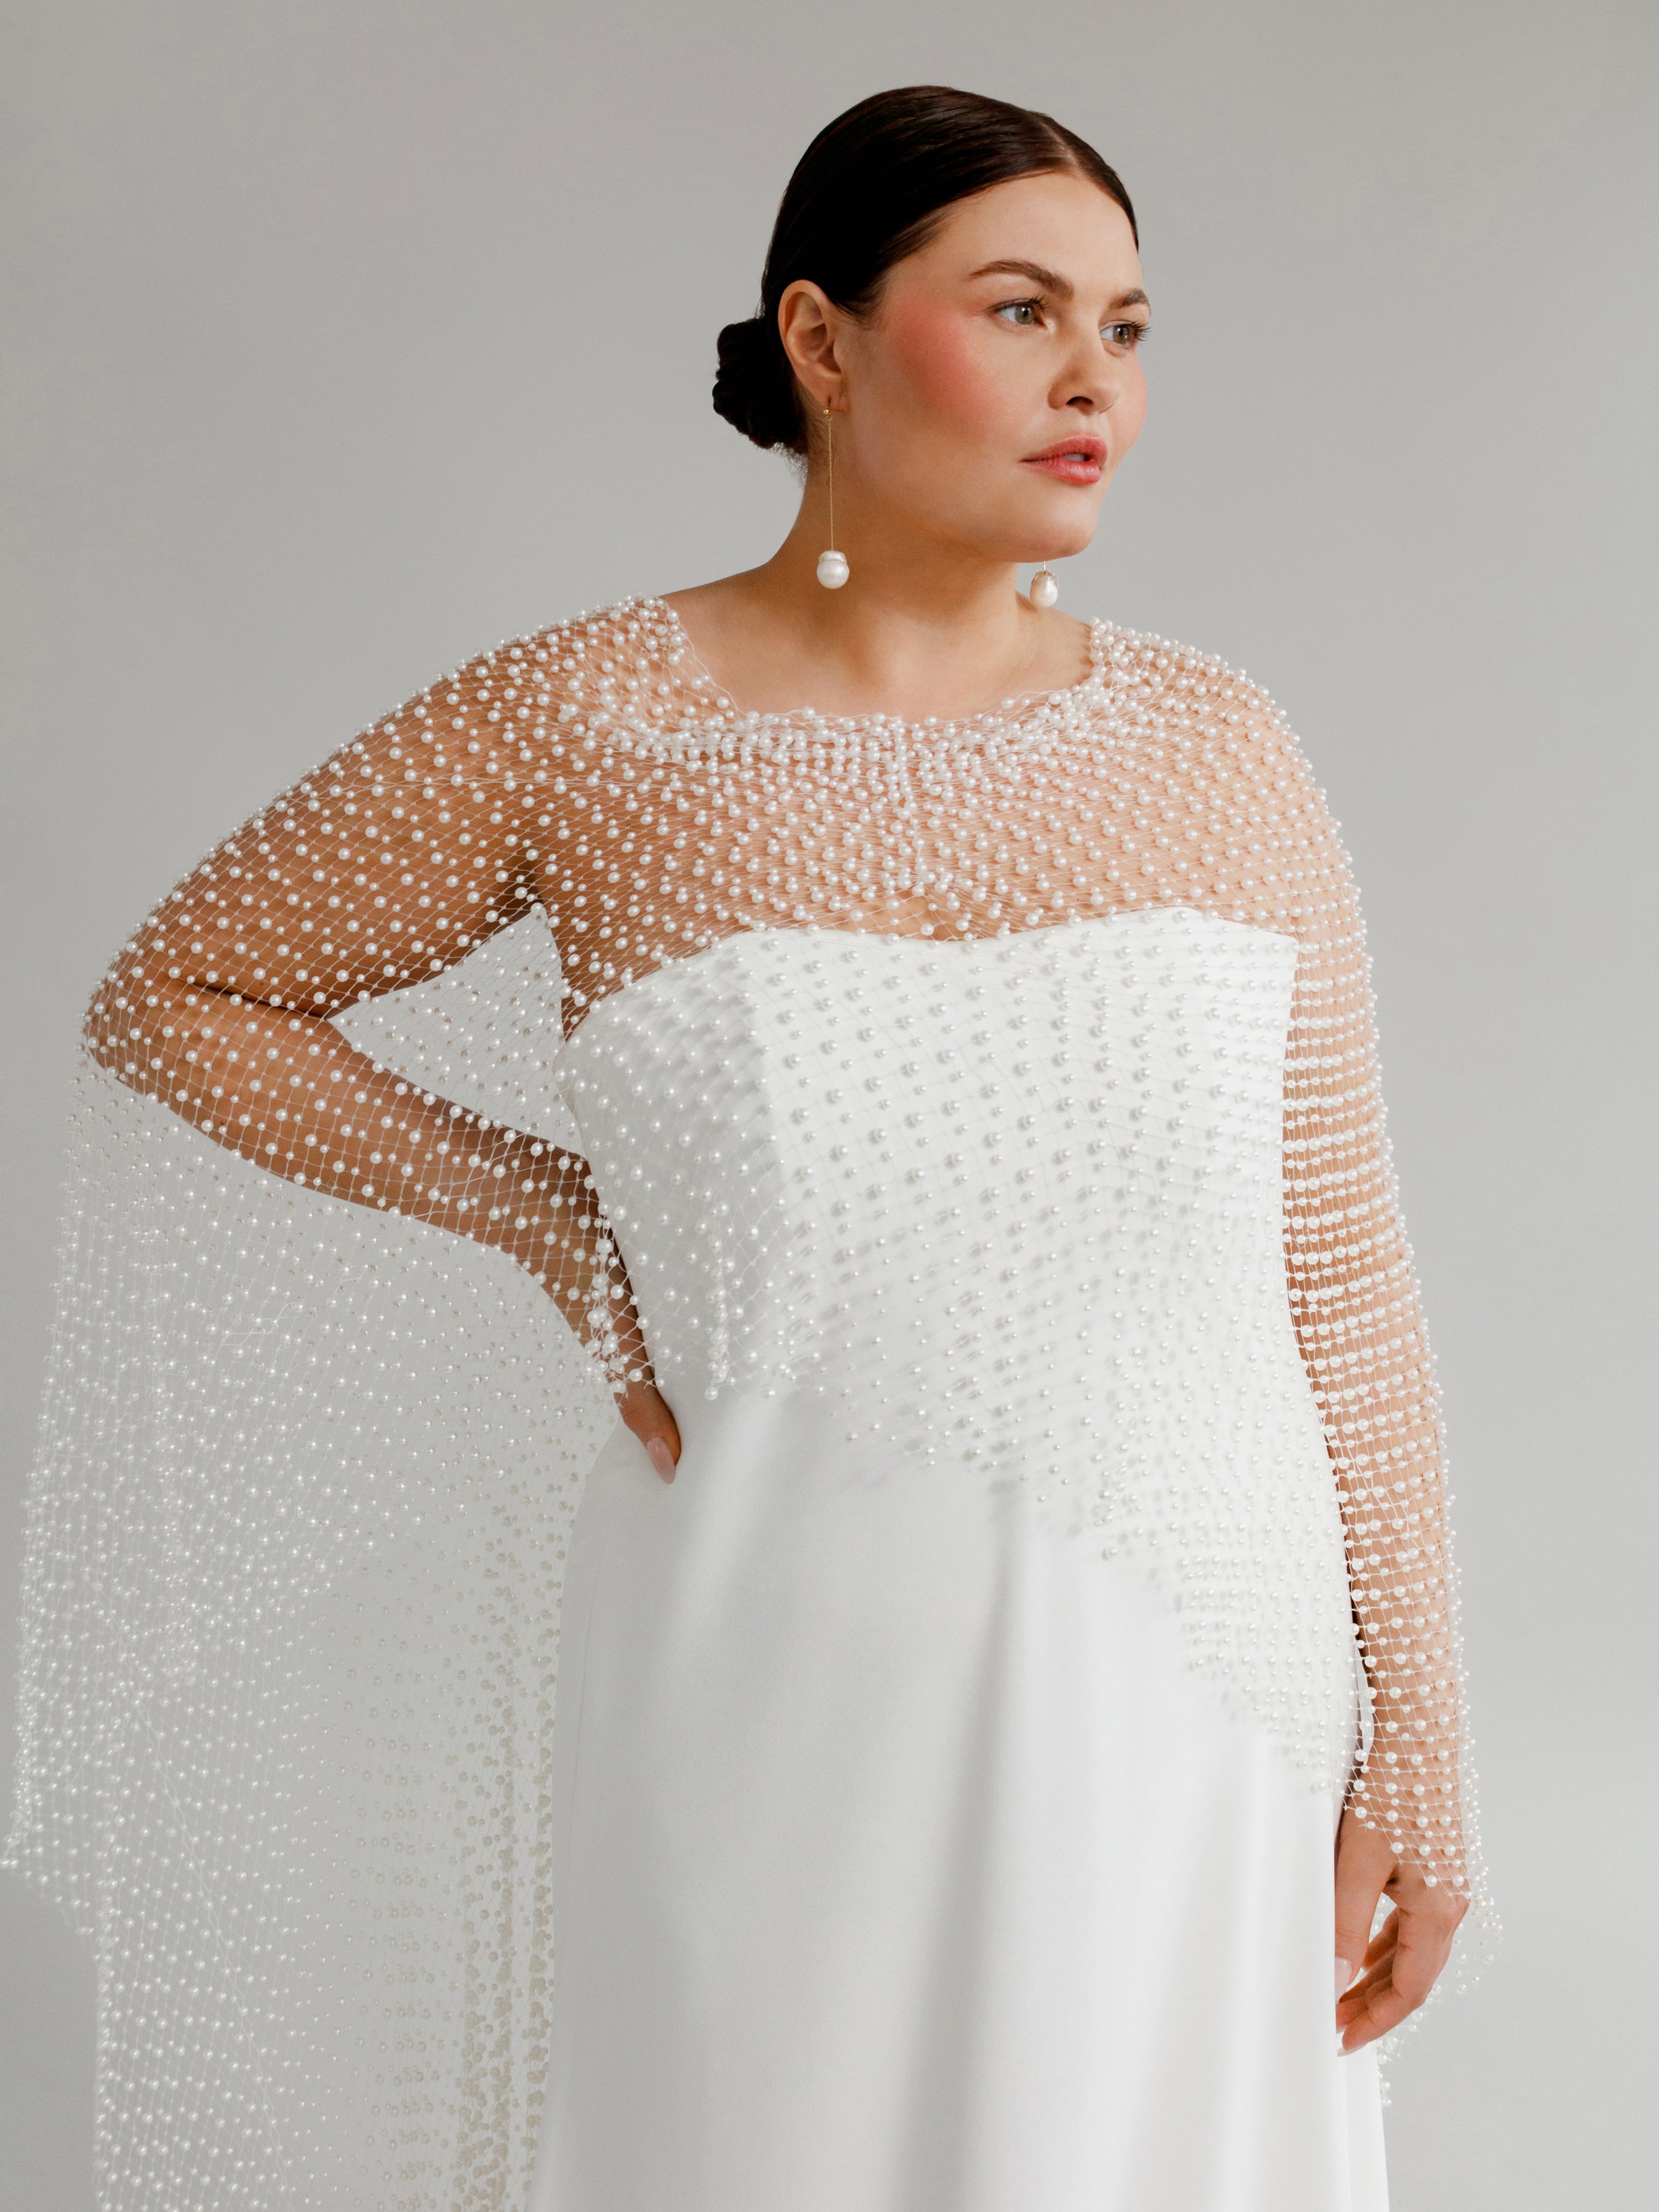 Leonora (With Cape) : A strapless, bias-cut wedding gown paired with a dramatic pearl cape